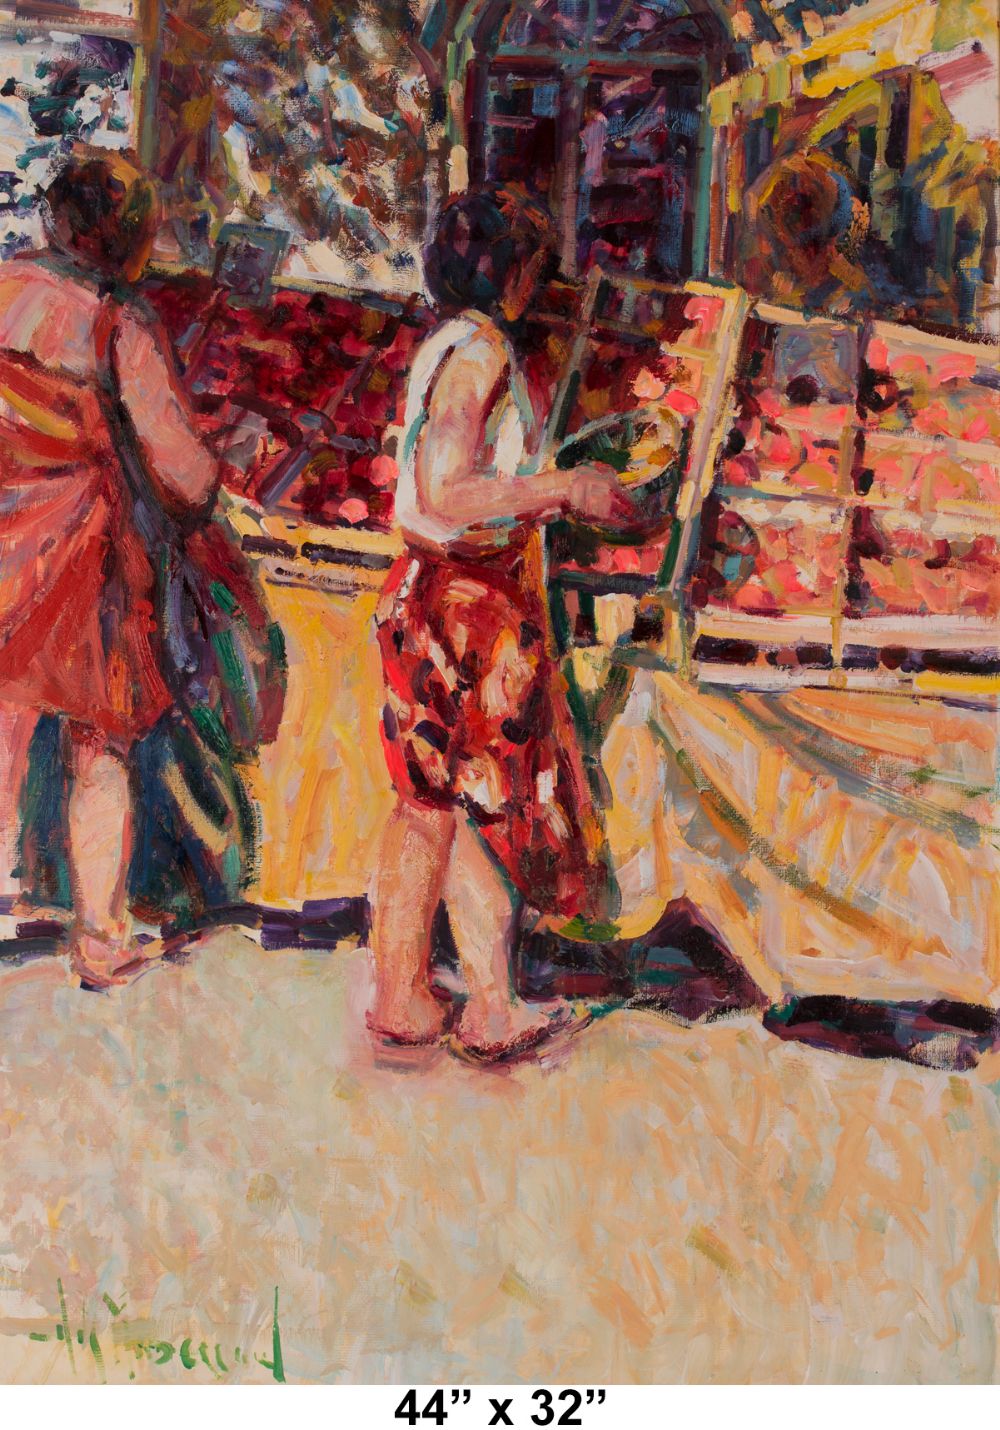 MARKET DAY by Arthur K Maderson  at Dolan's Art Auction House